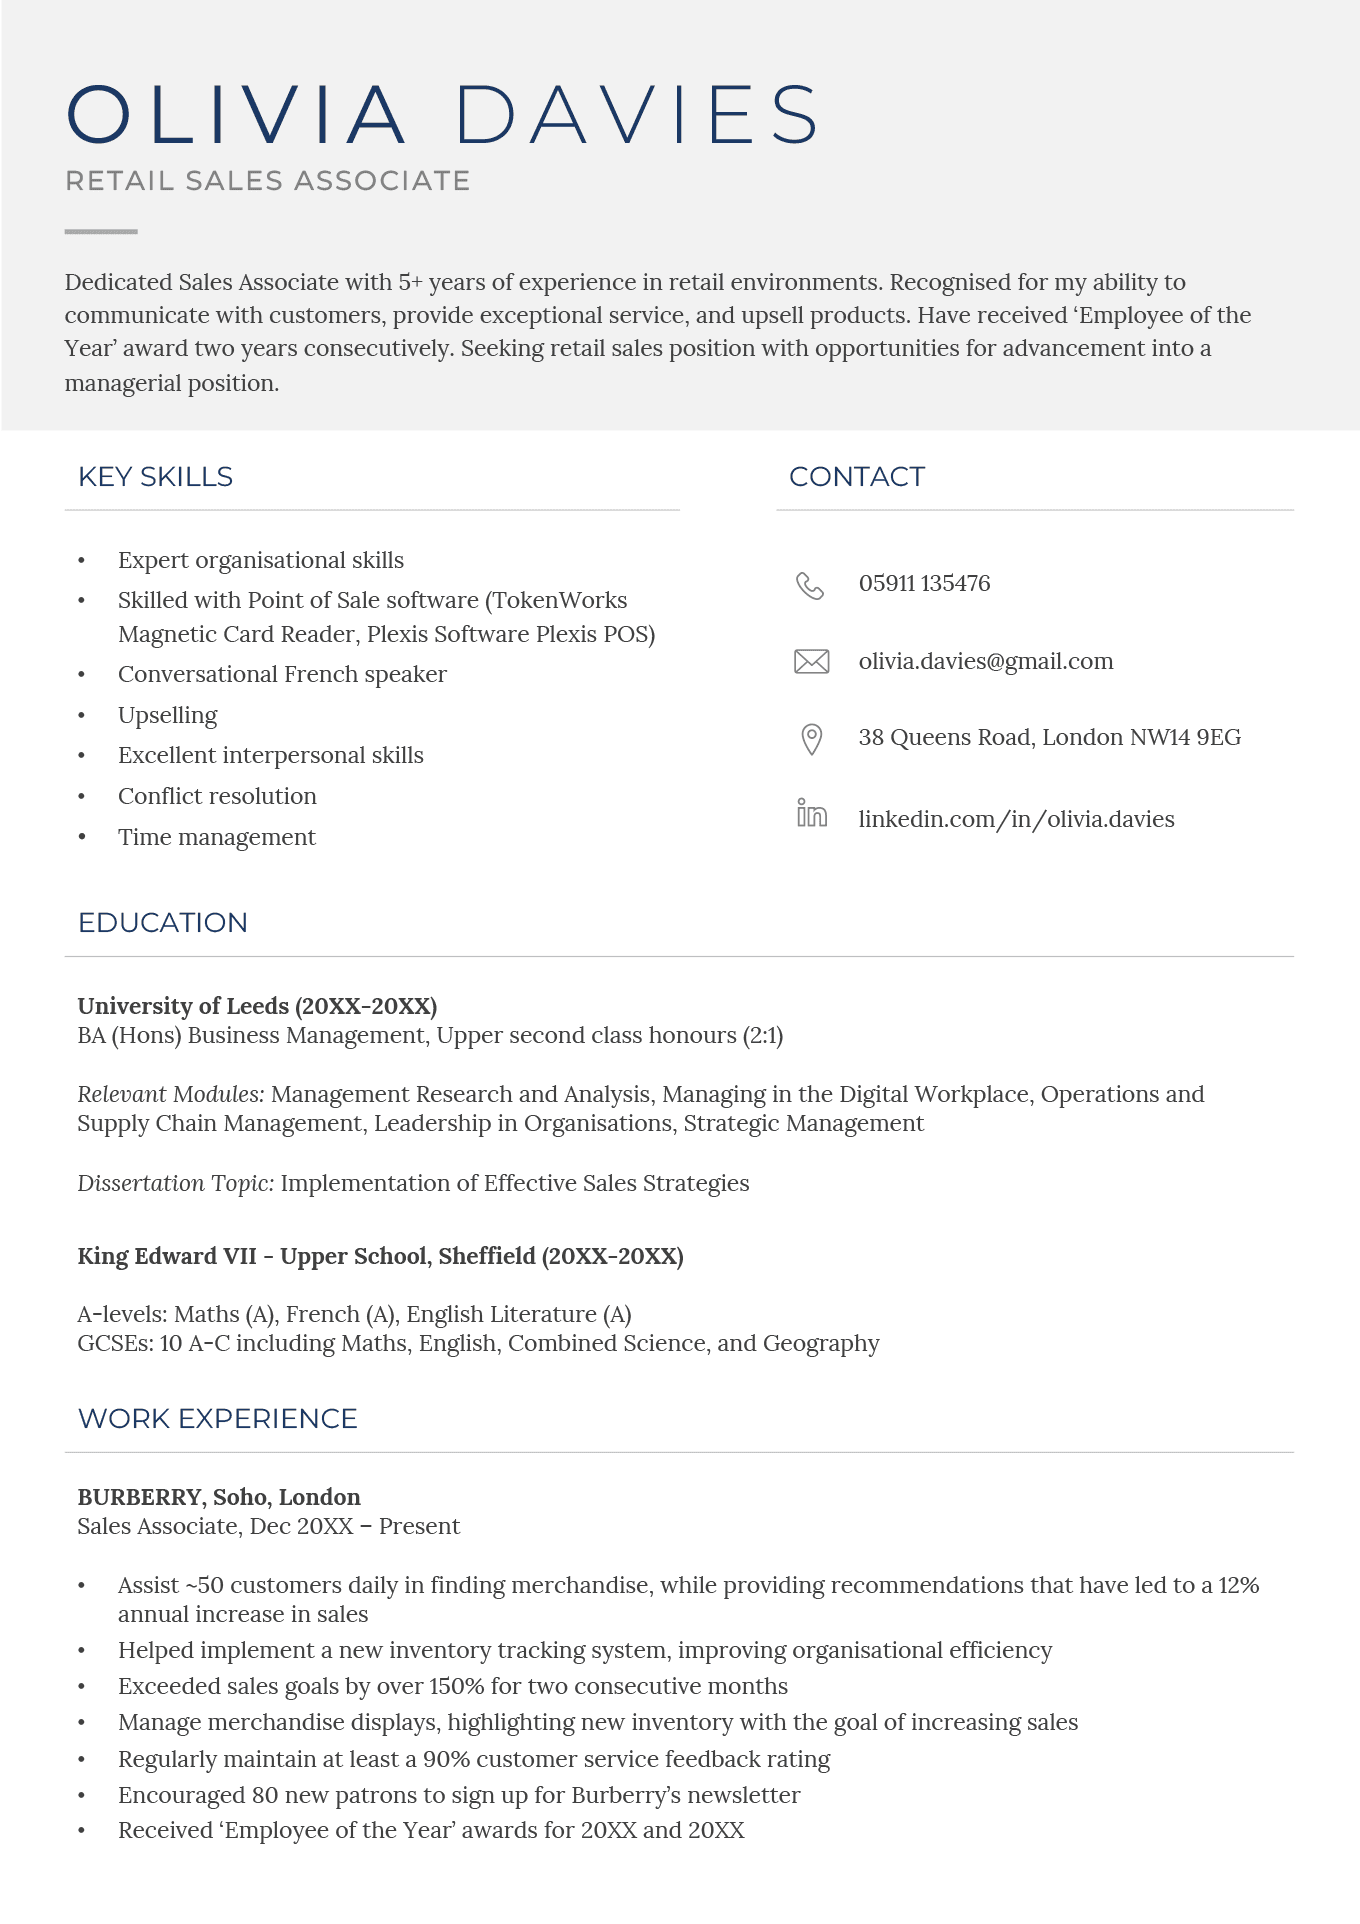 A template for making a creative CV, featuring a large key skills section and detailed education history.